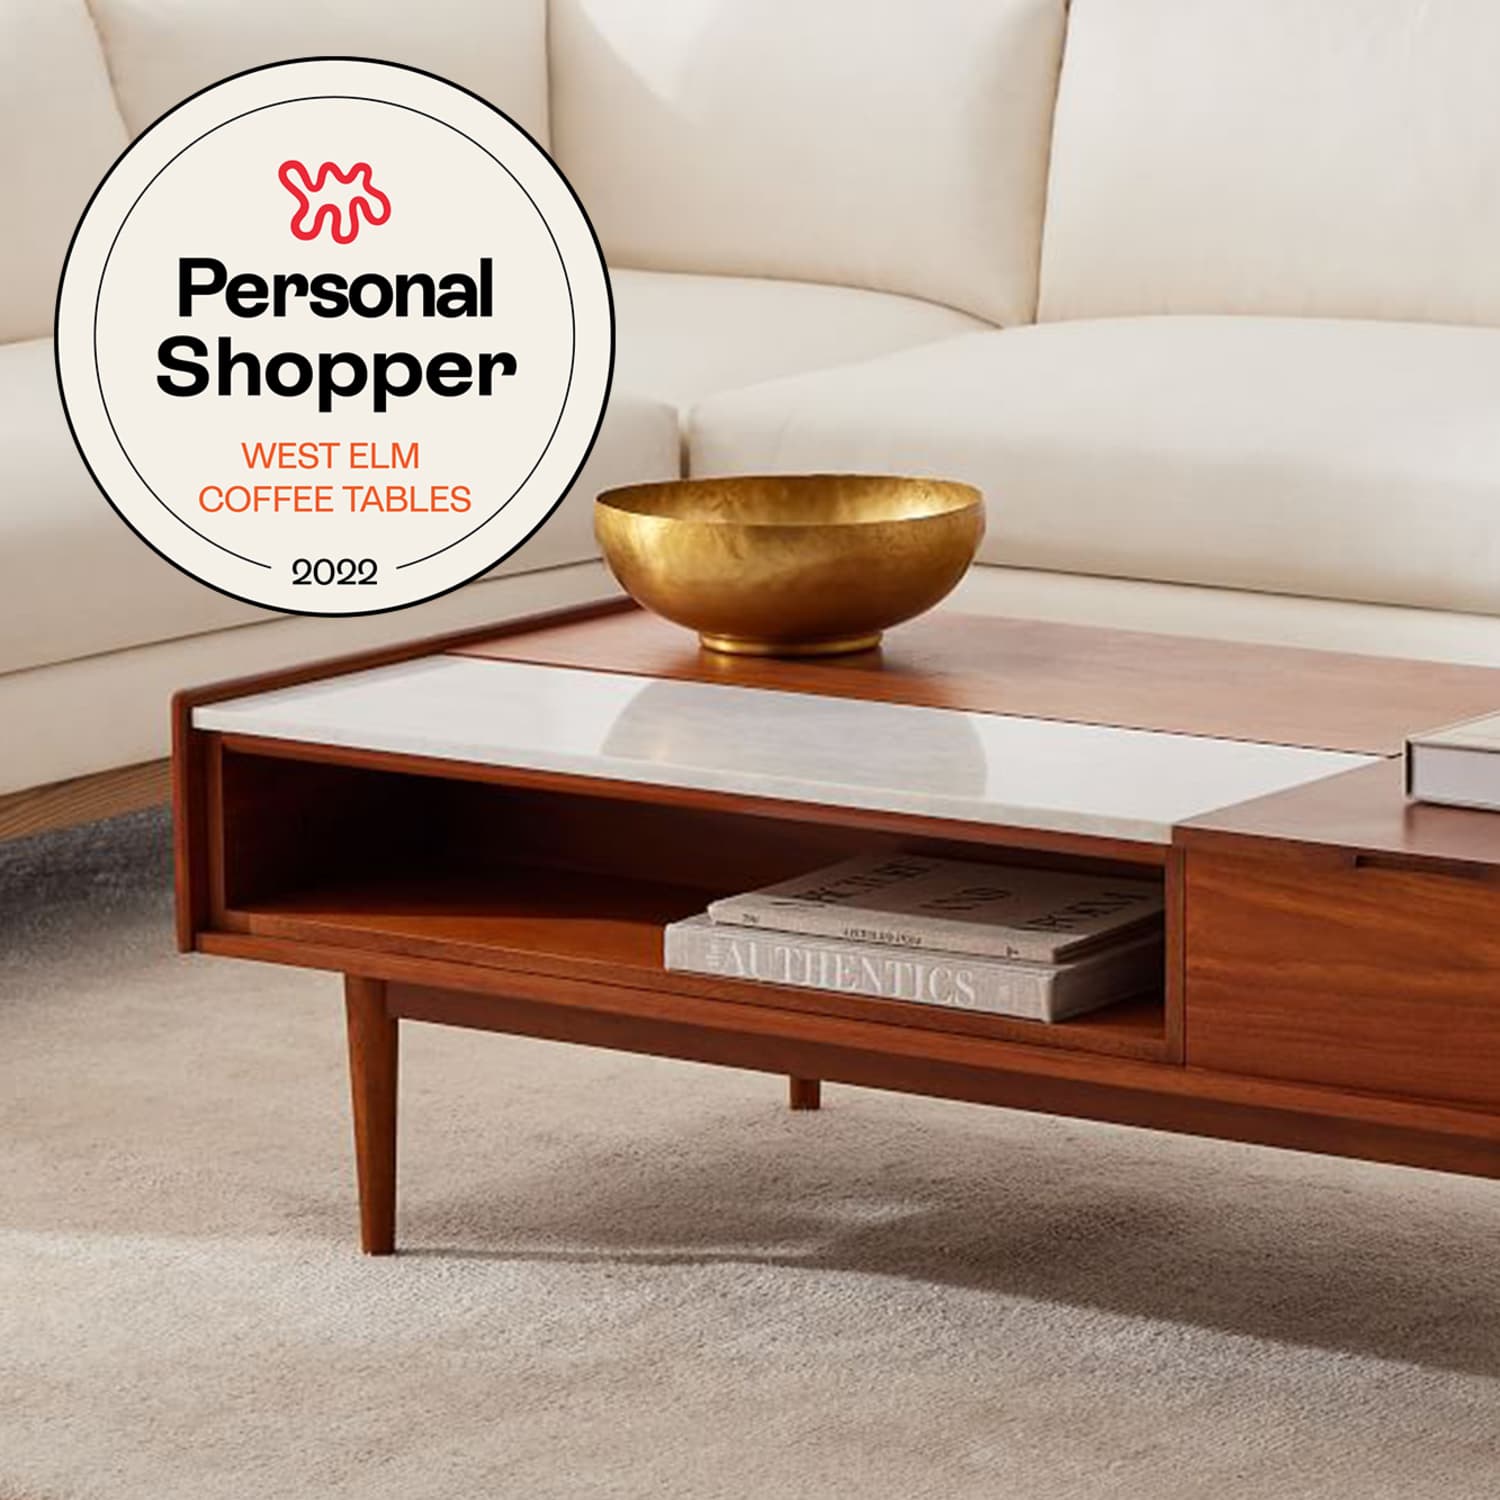 The Best Editor-Tested West Elm Coffee Tables 2022 | Apartment Therapy